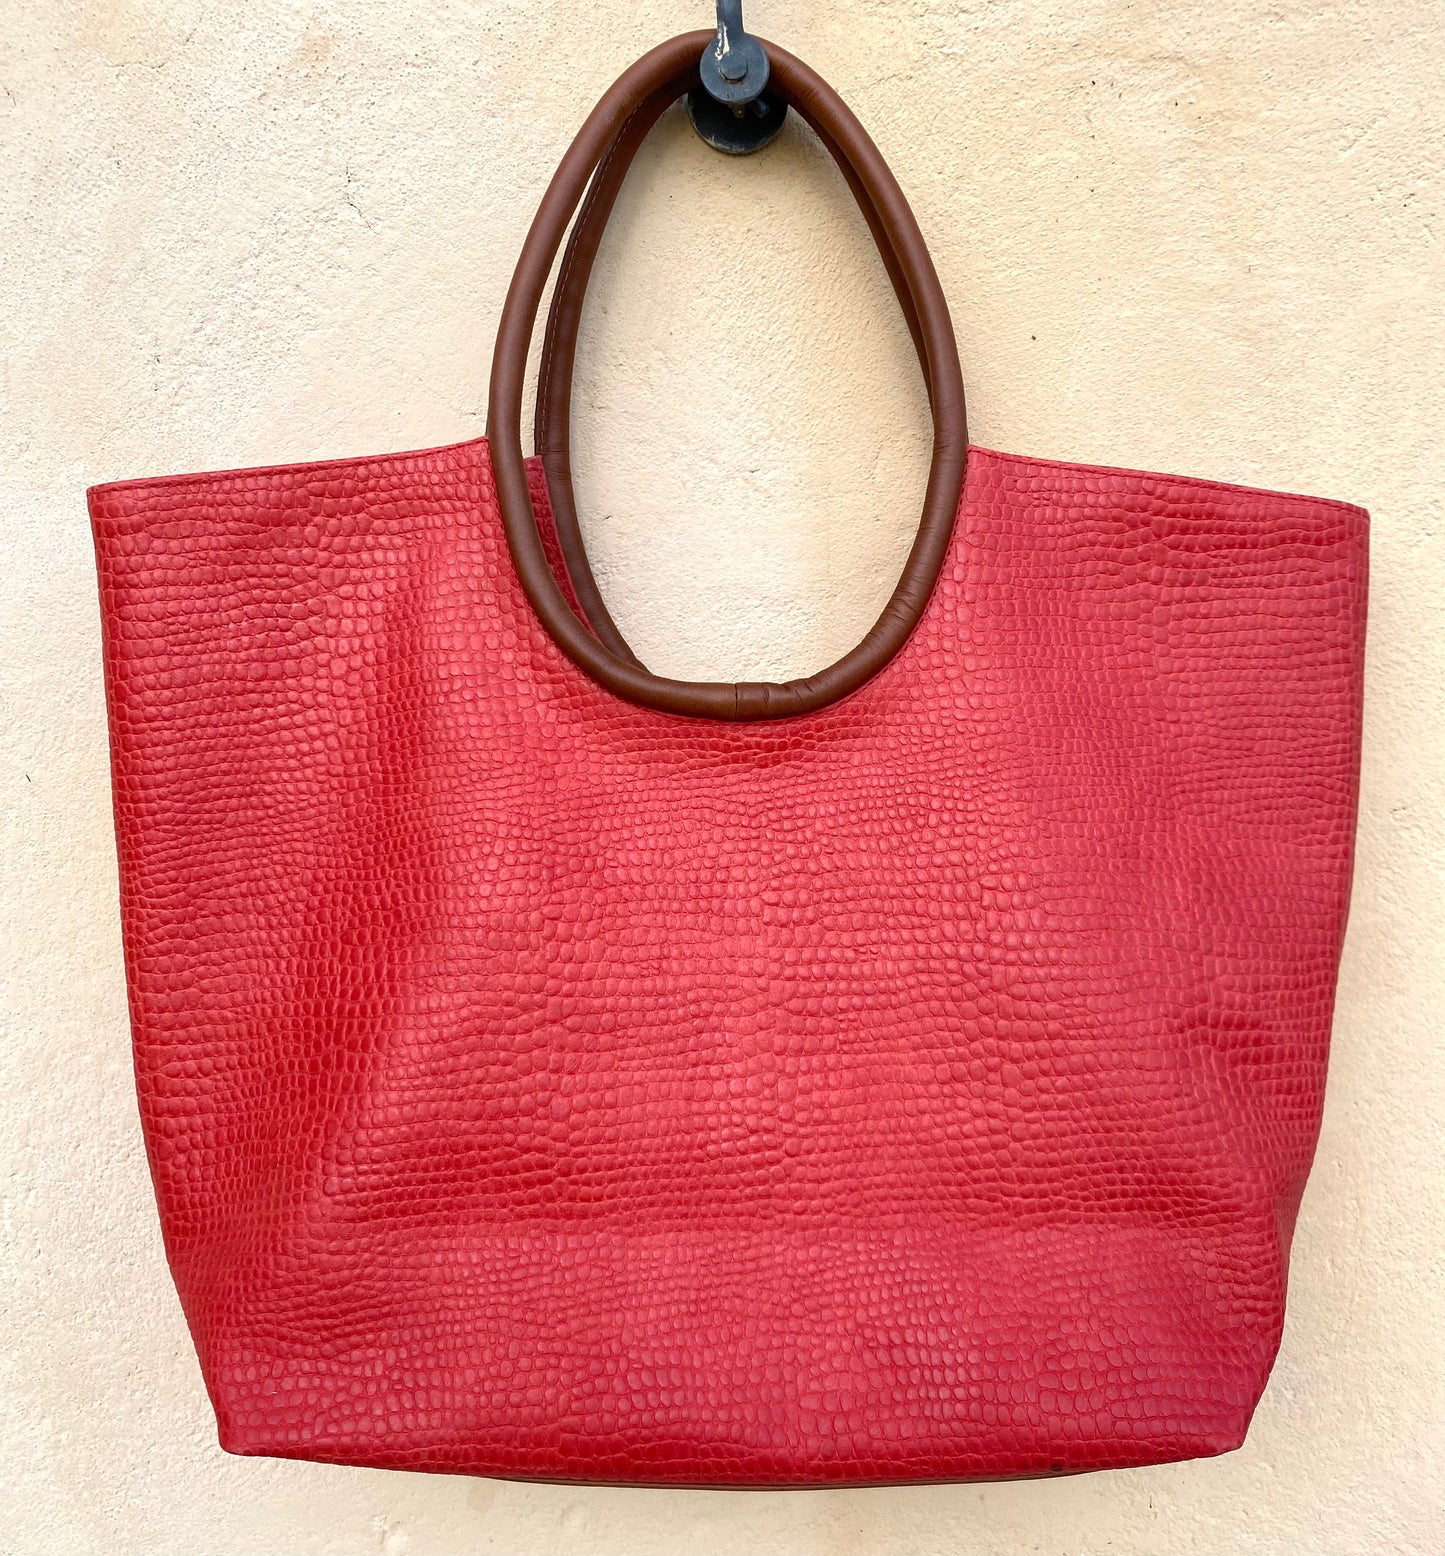 Red Printed Leather Bag